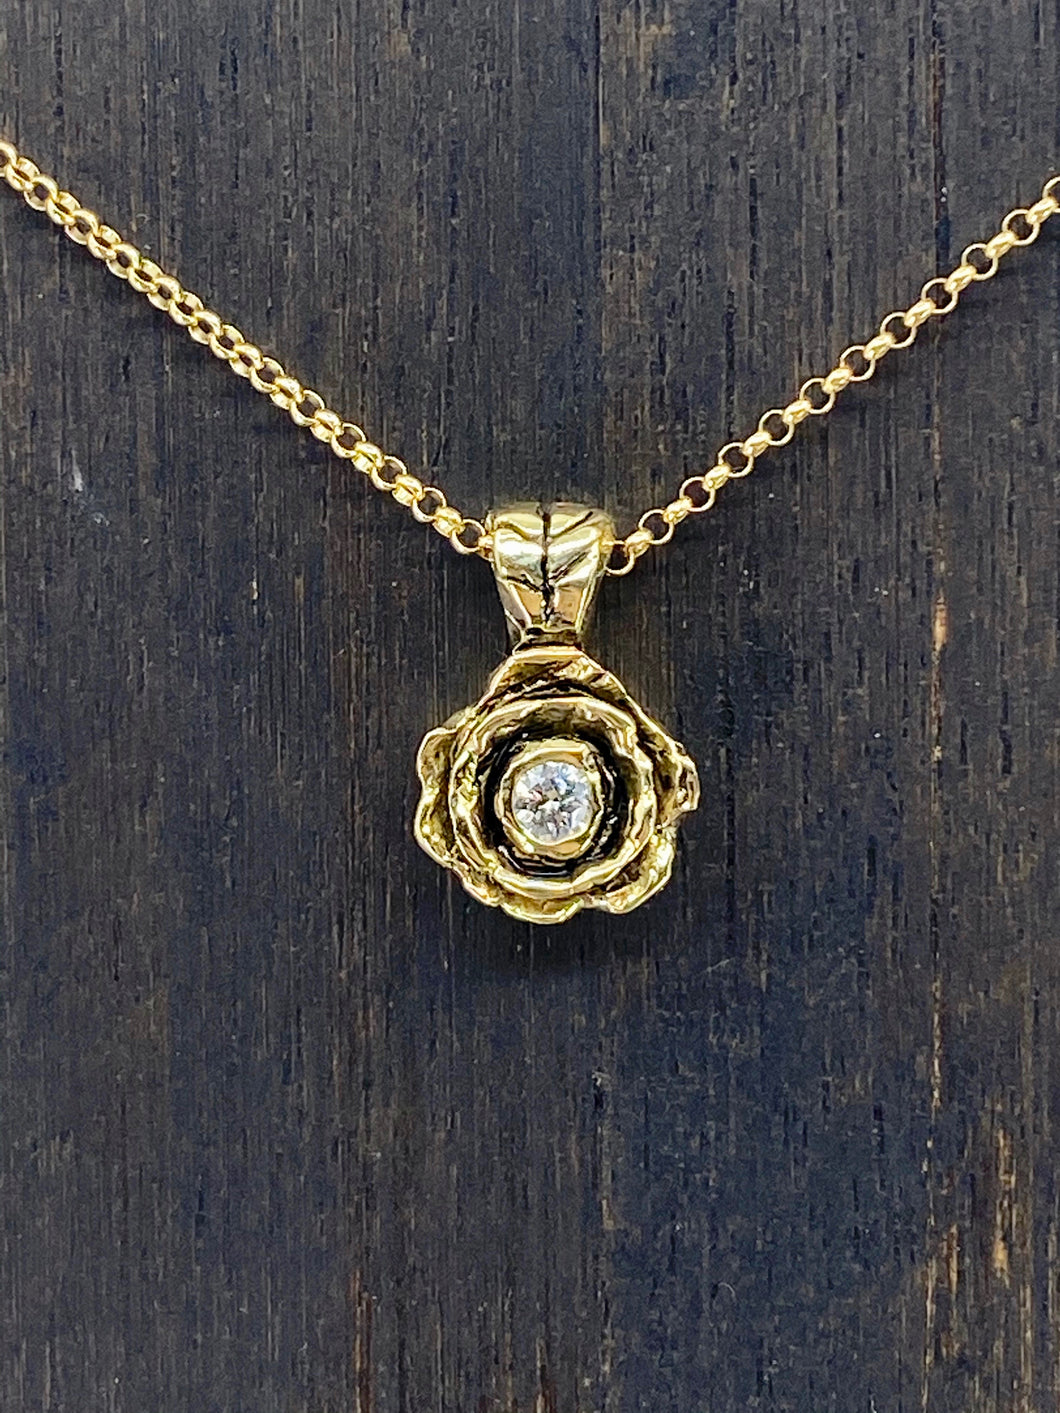 Gold Rose With White Diamond